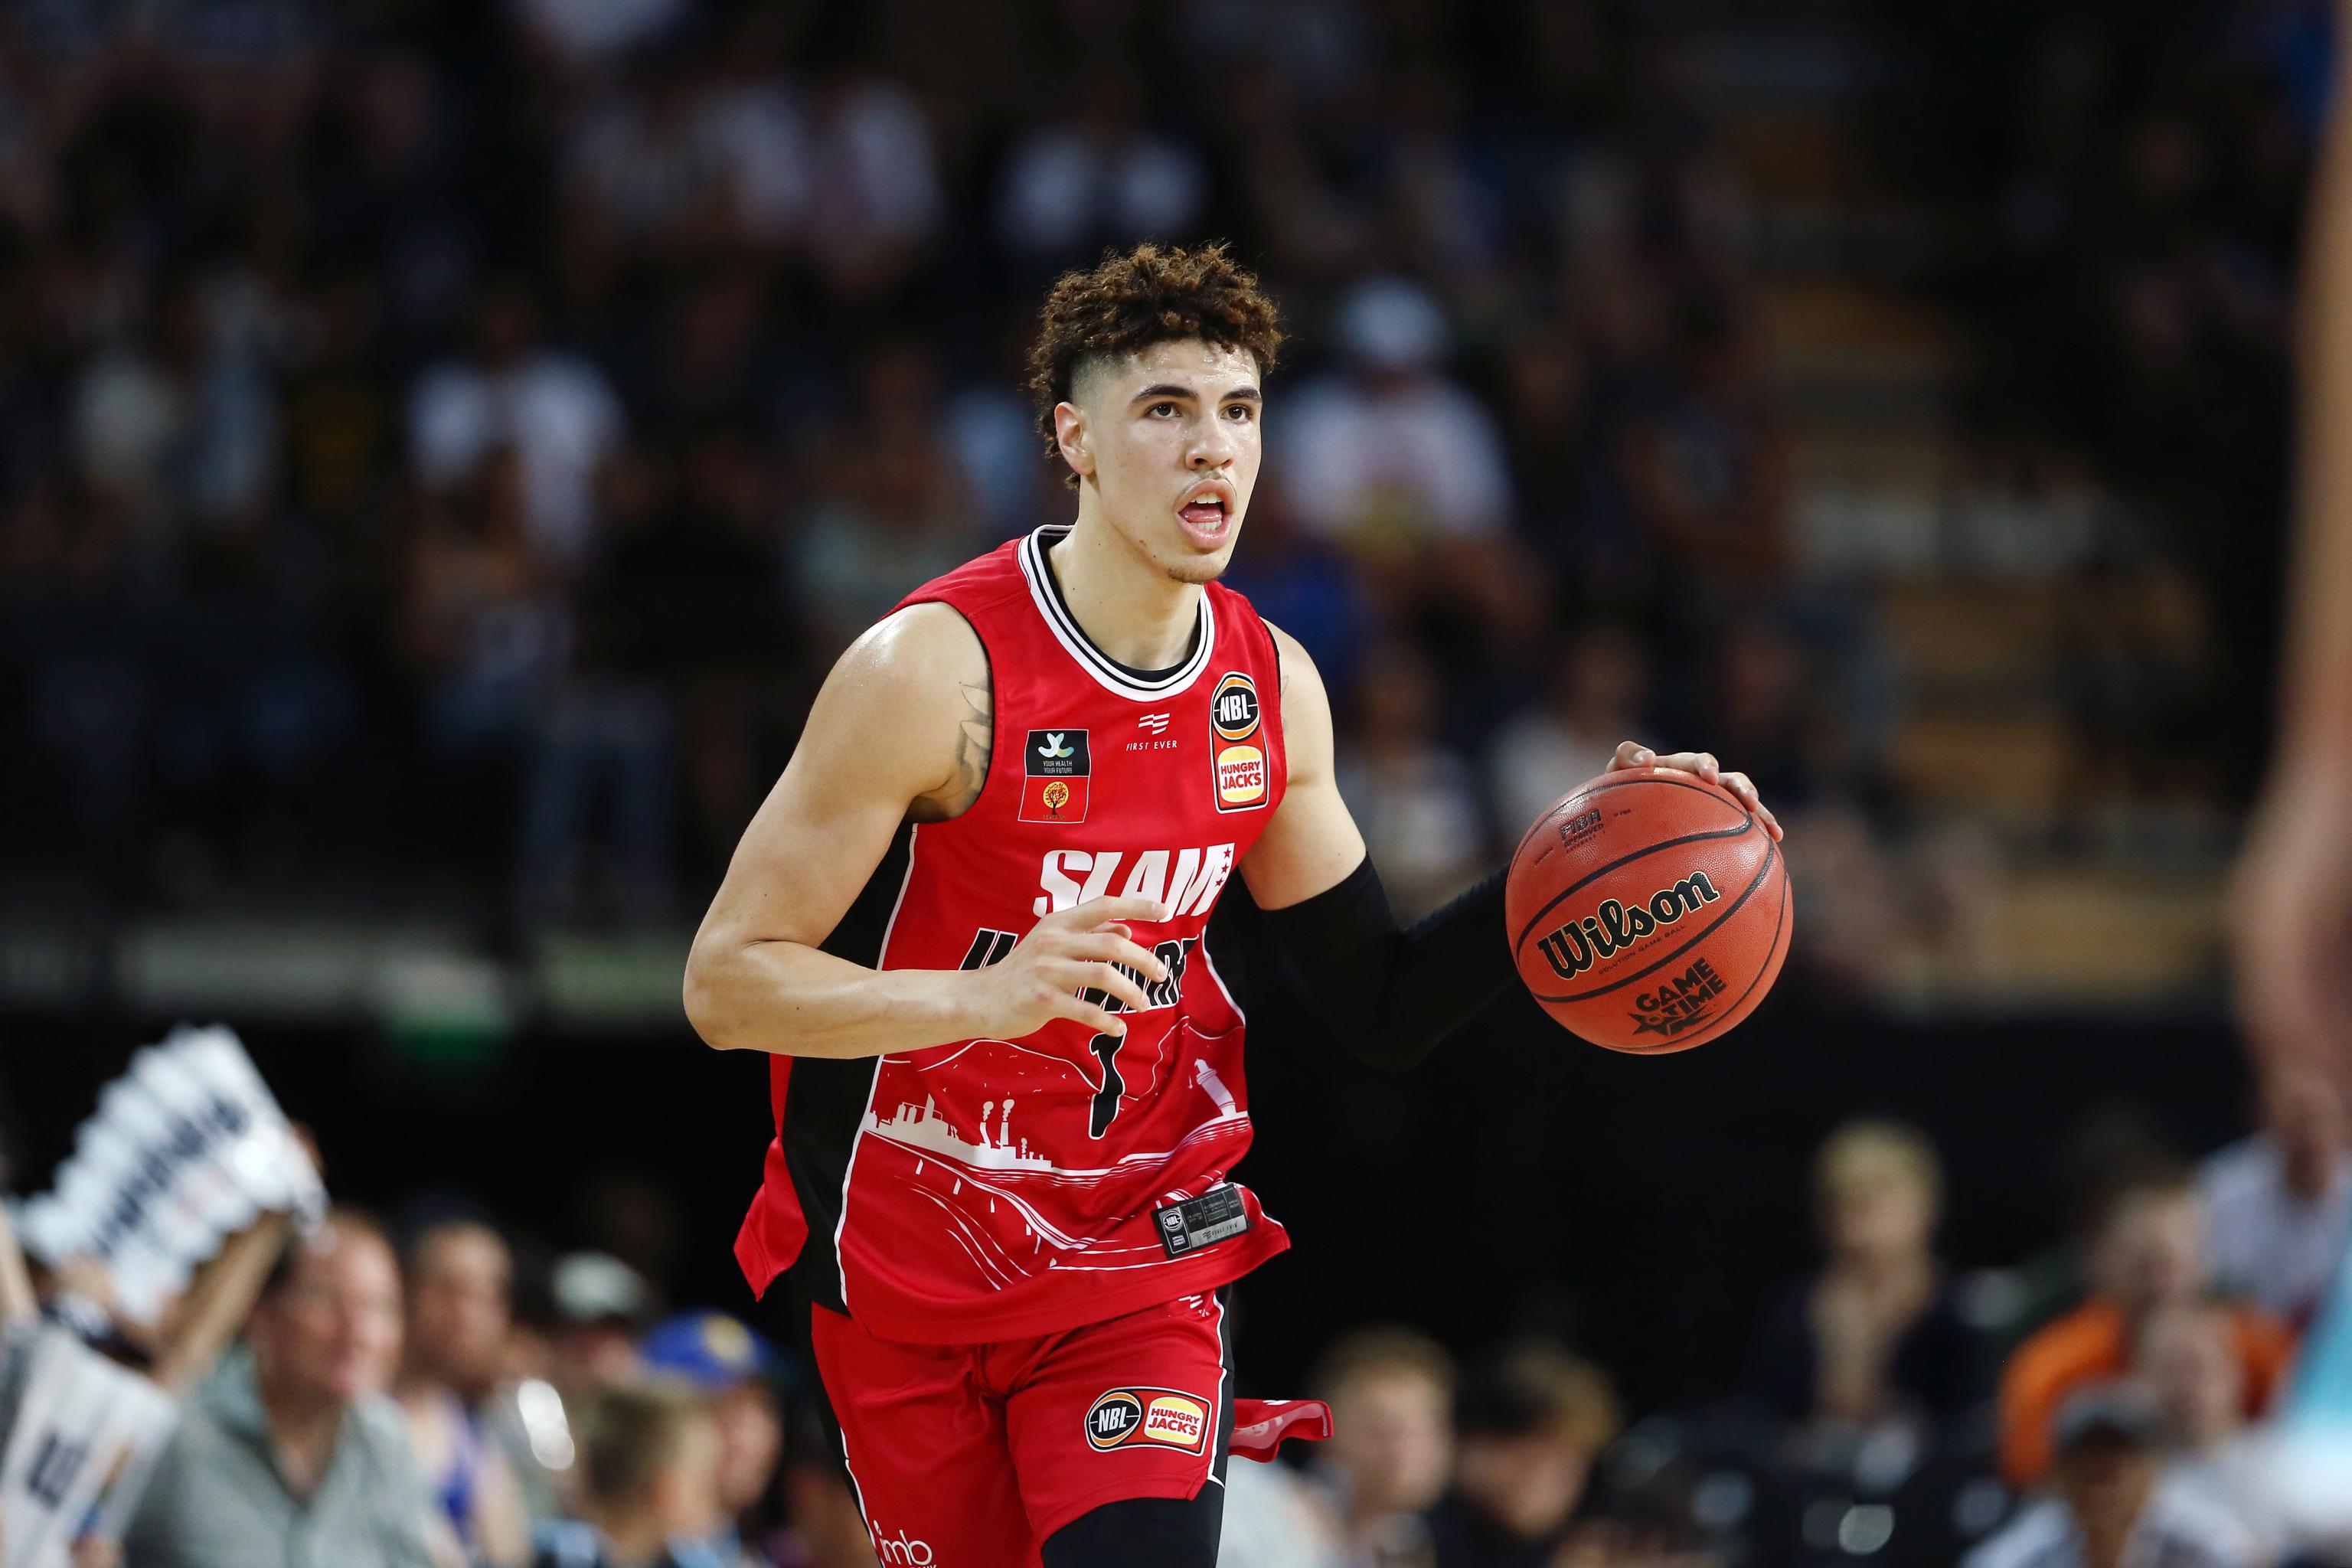 Nba Mock Draft 2020 Fresh Predictions After Lamelo Ball Out For Nbl Season Bleacher Report Latest News Videos And Highlights